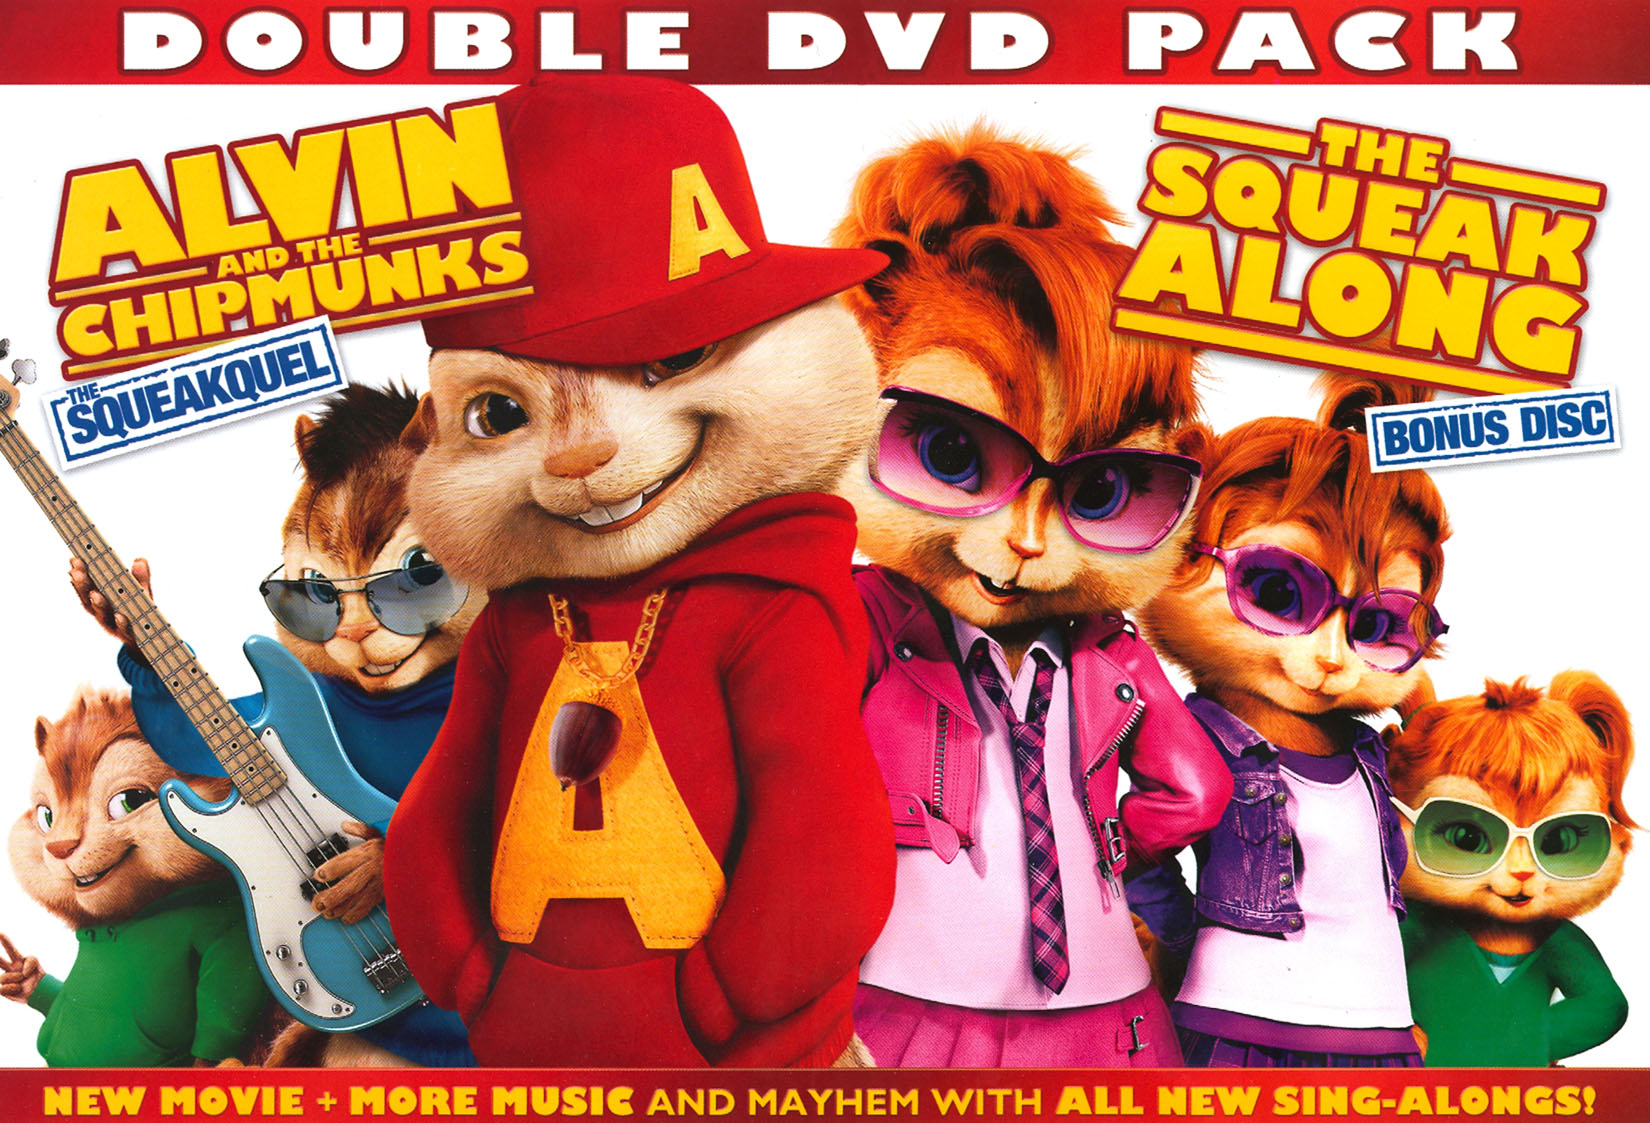 Watch Alvin and the Chipmunks: The Squeakquel